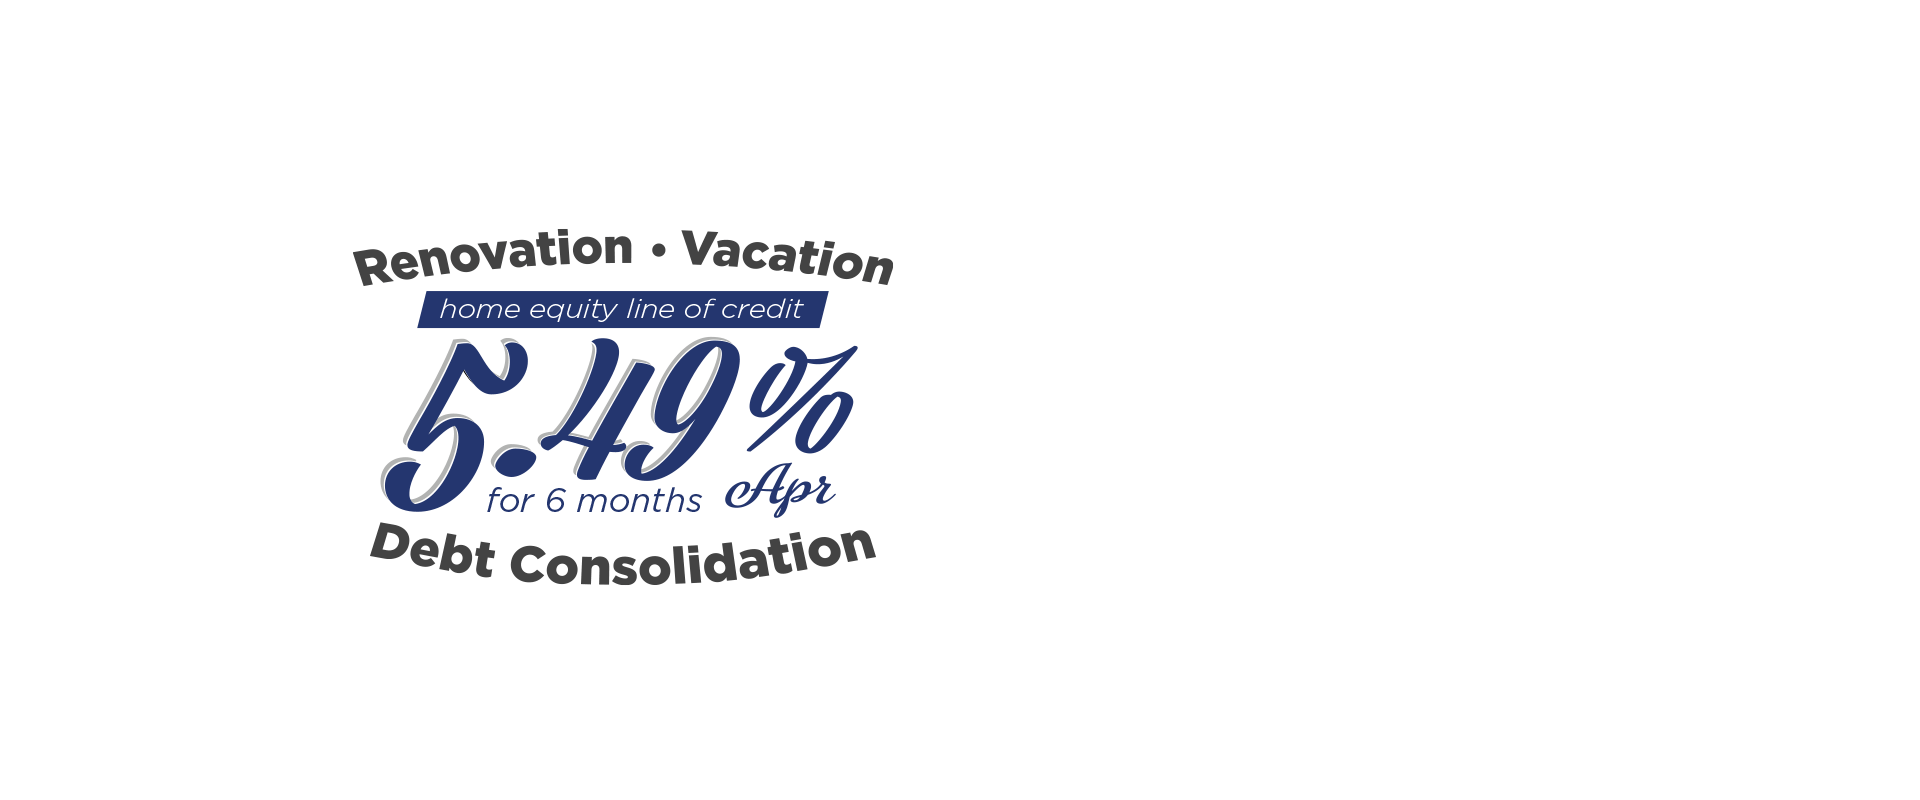 Vacation. Renovation. Debt Consolidation. Home equity line of credit rates as low as 5.49% APR for 6 months.